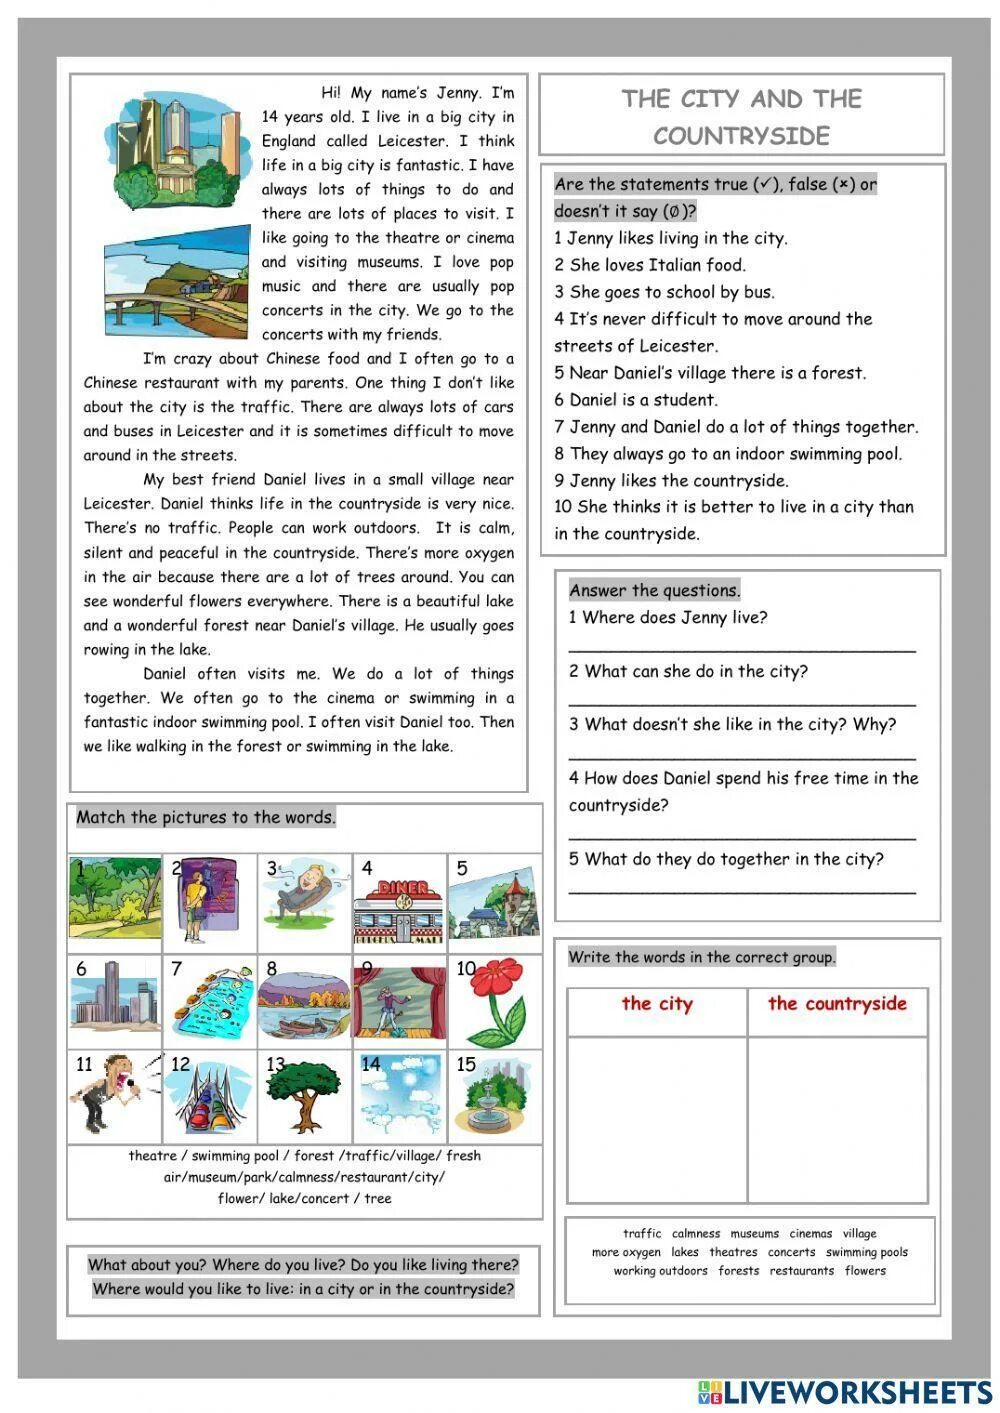 Talking about where you live. Город Worksheets. Countryside Vocabulary Worksheets. In the Country Worksheets. Жизнь в городе Worksheets English.